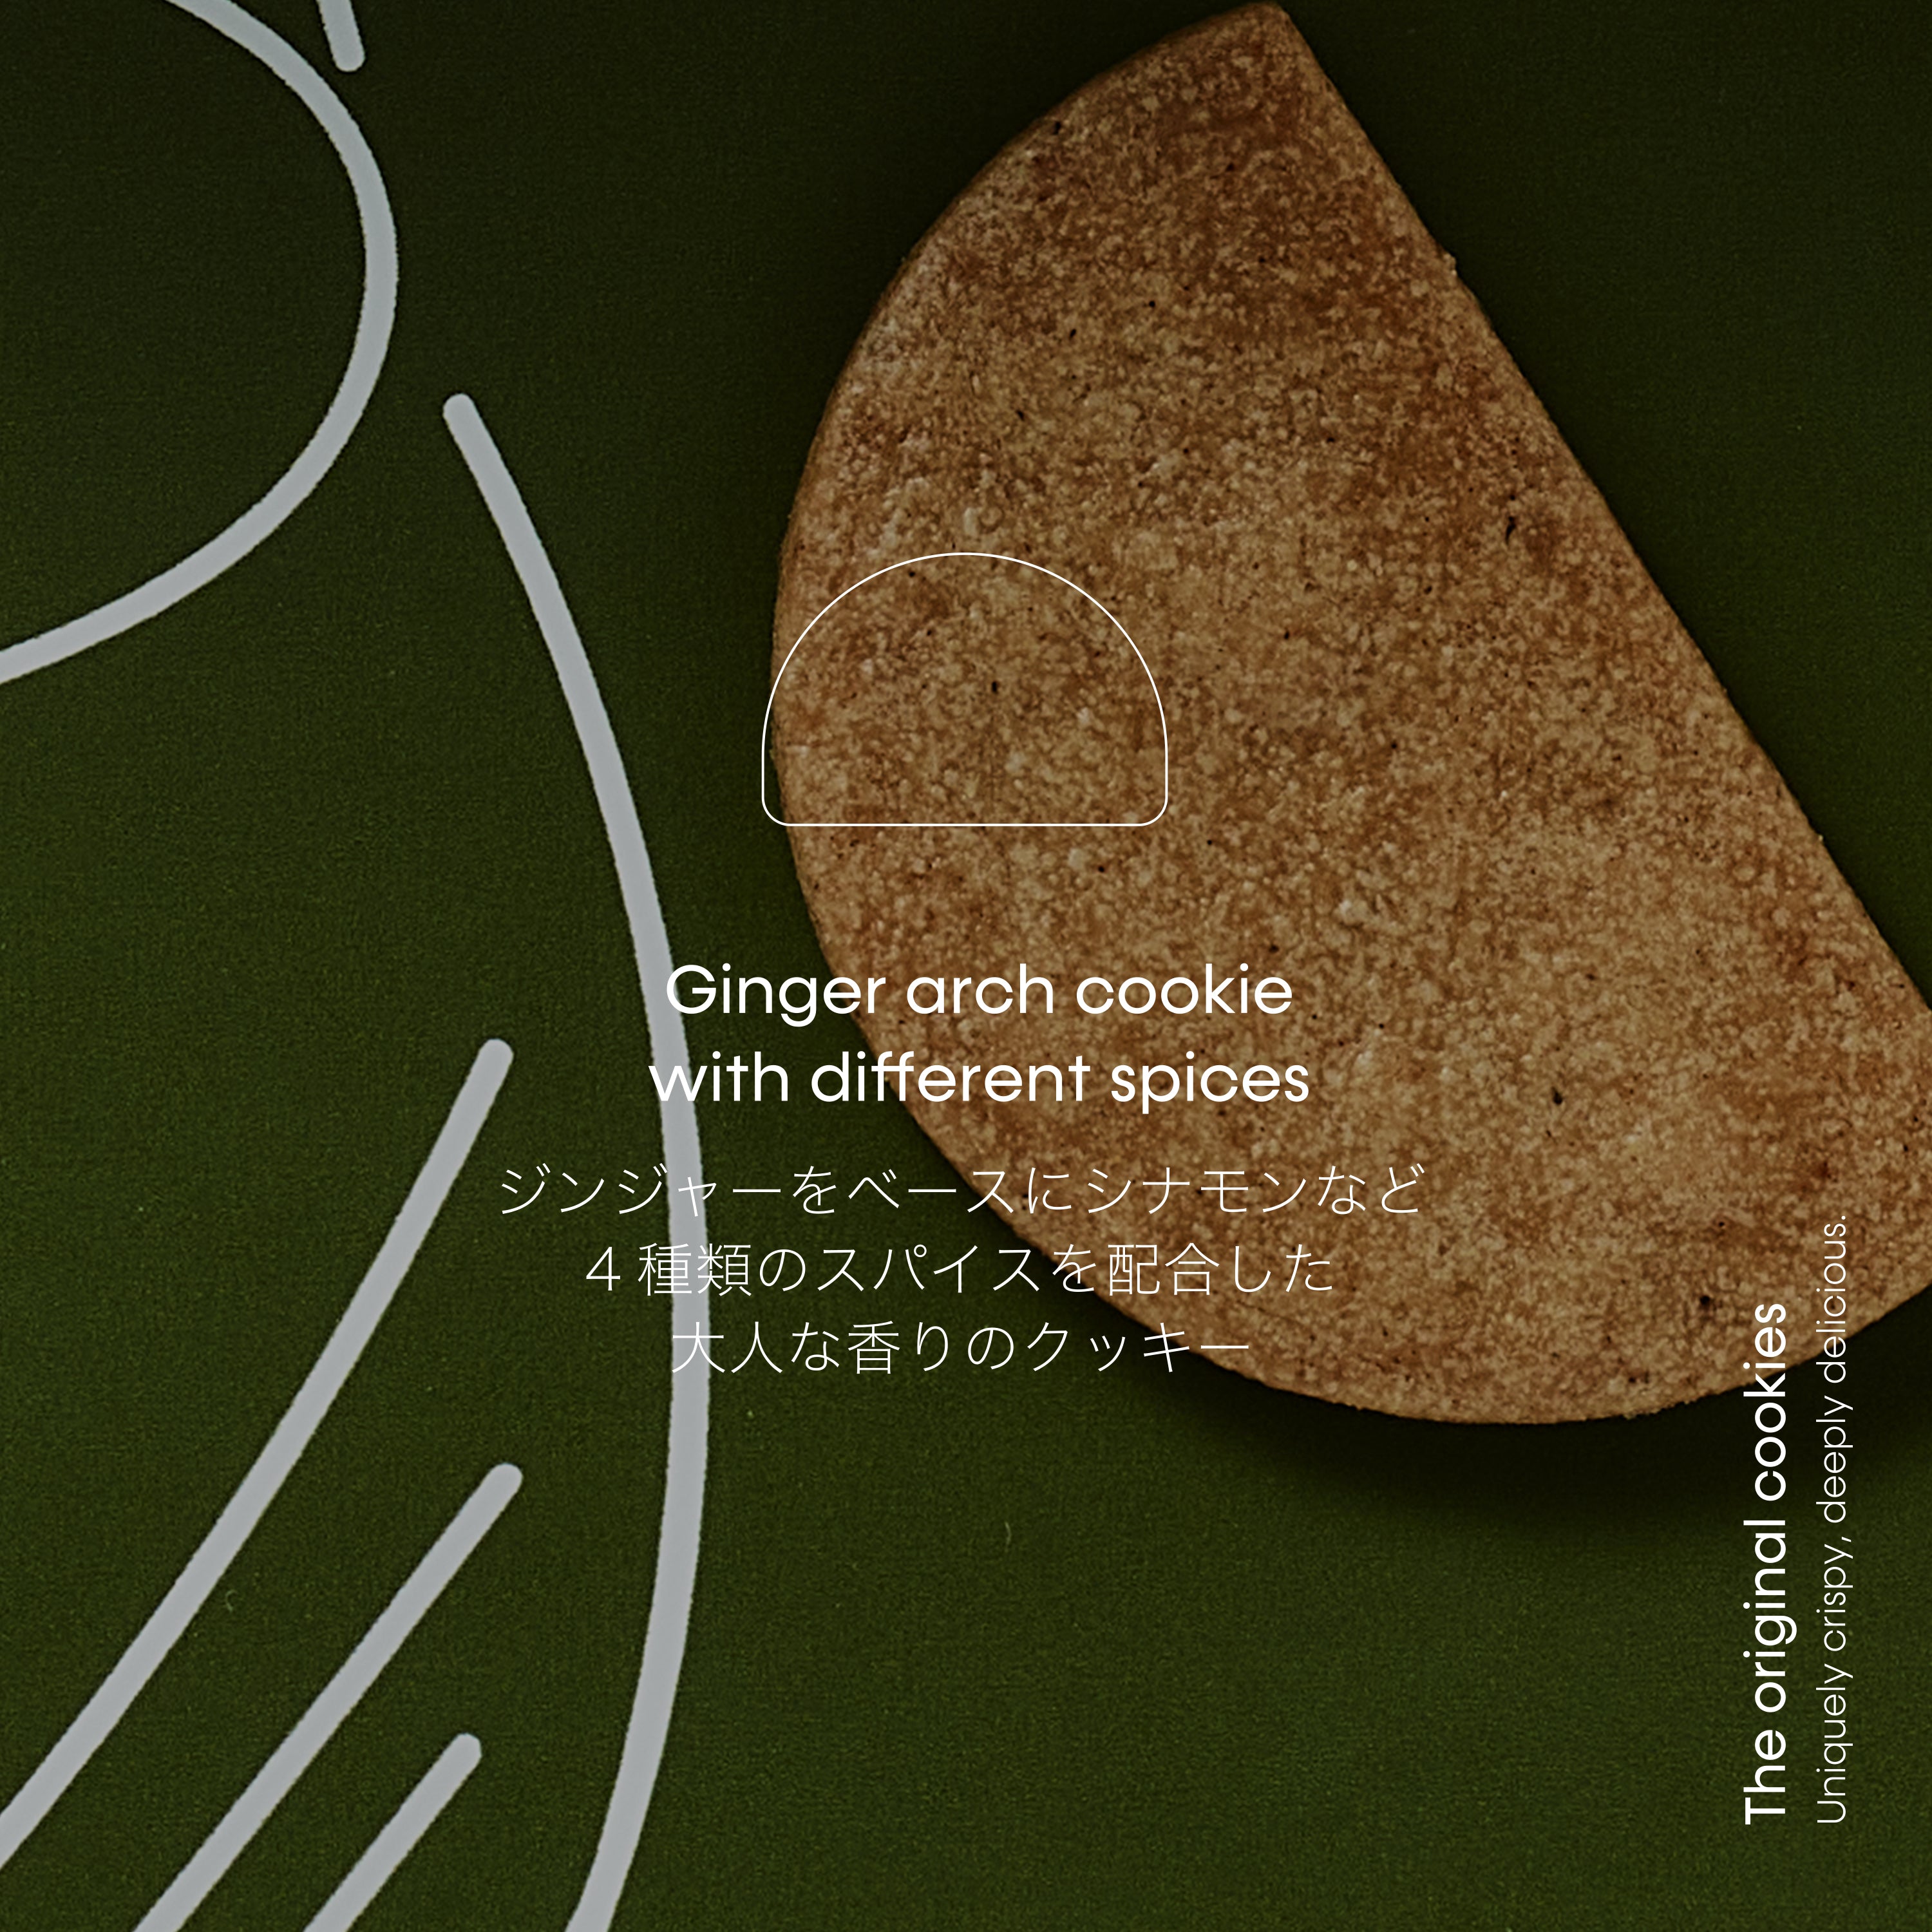 【Japan only】STUDIO THE BLUE BOY - The original cookies